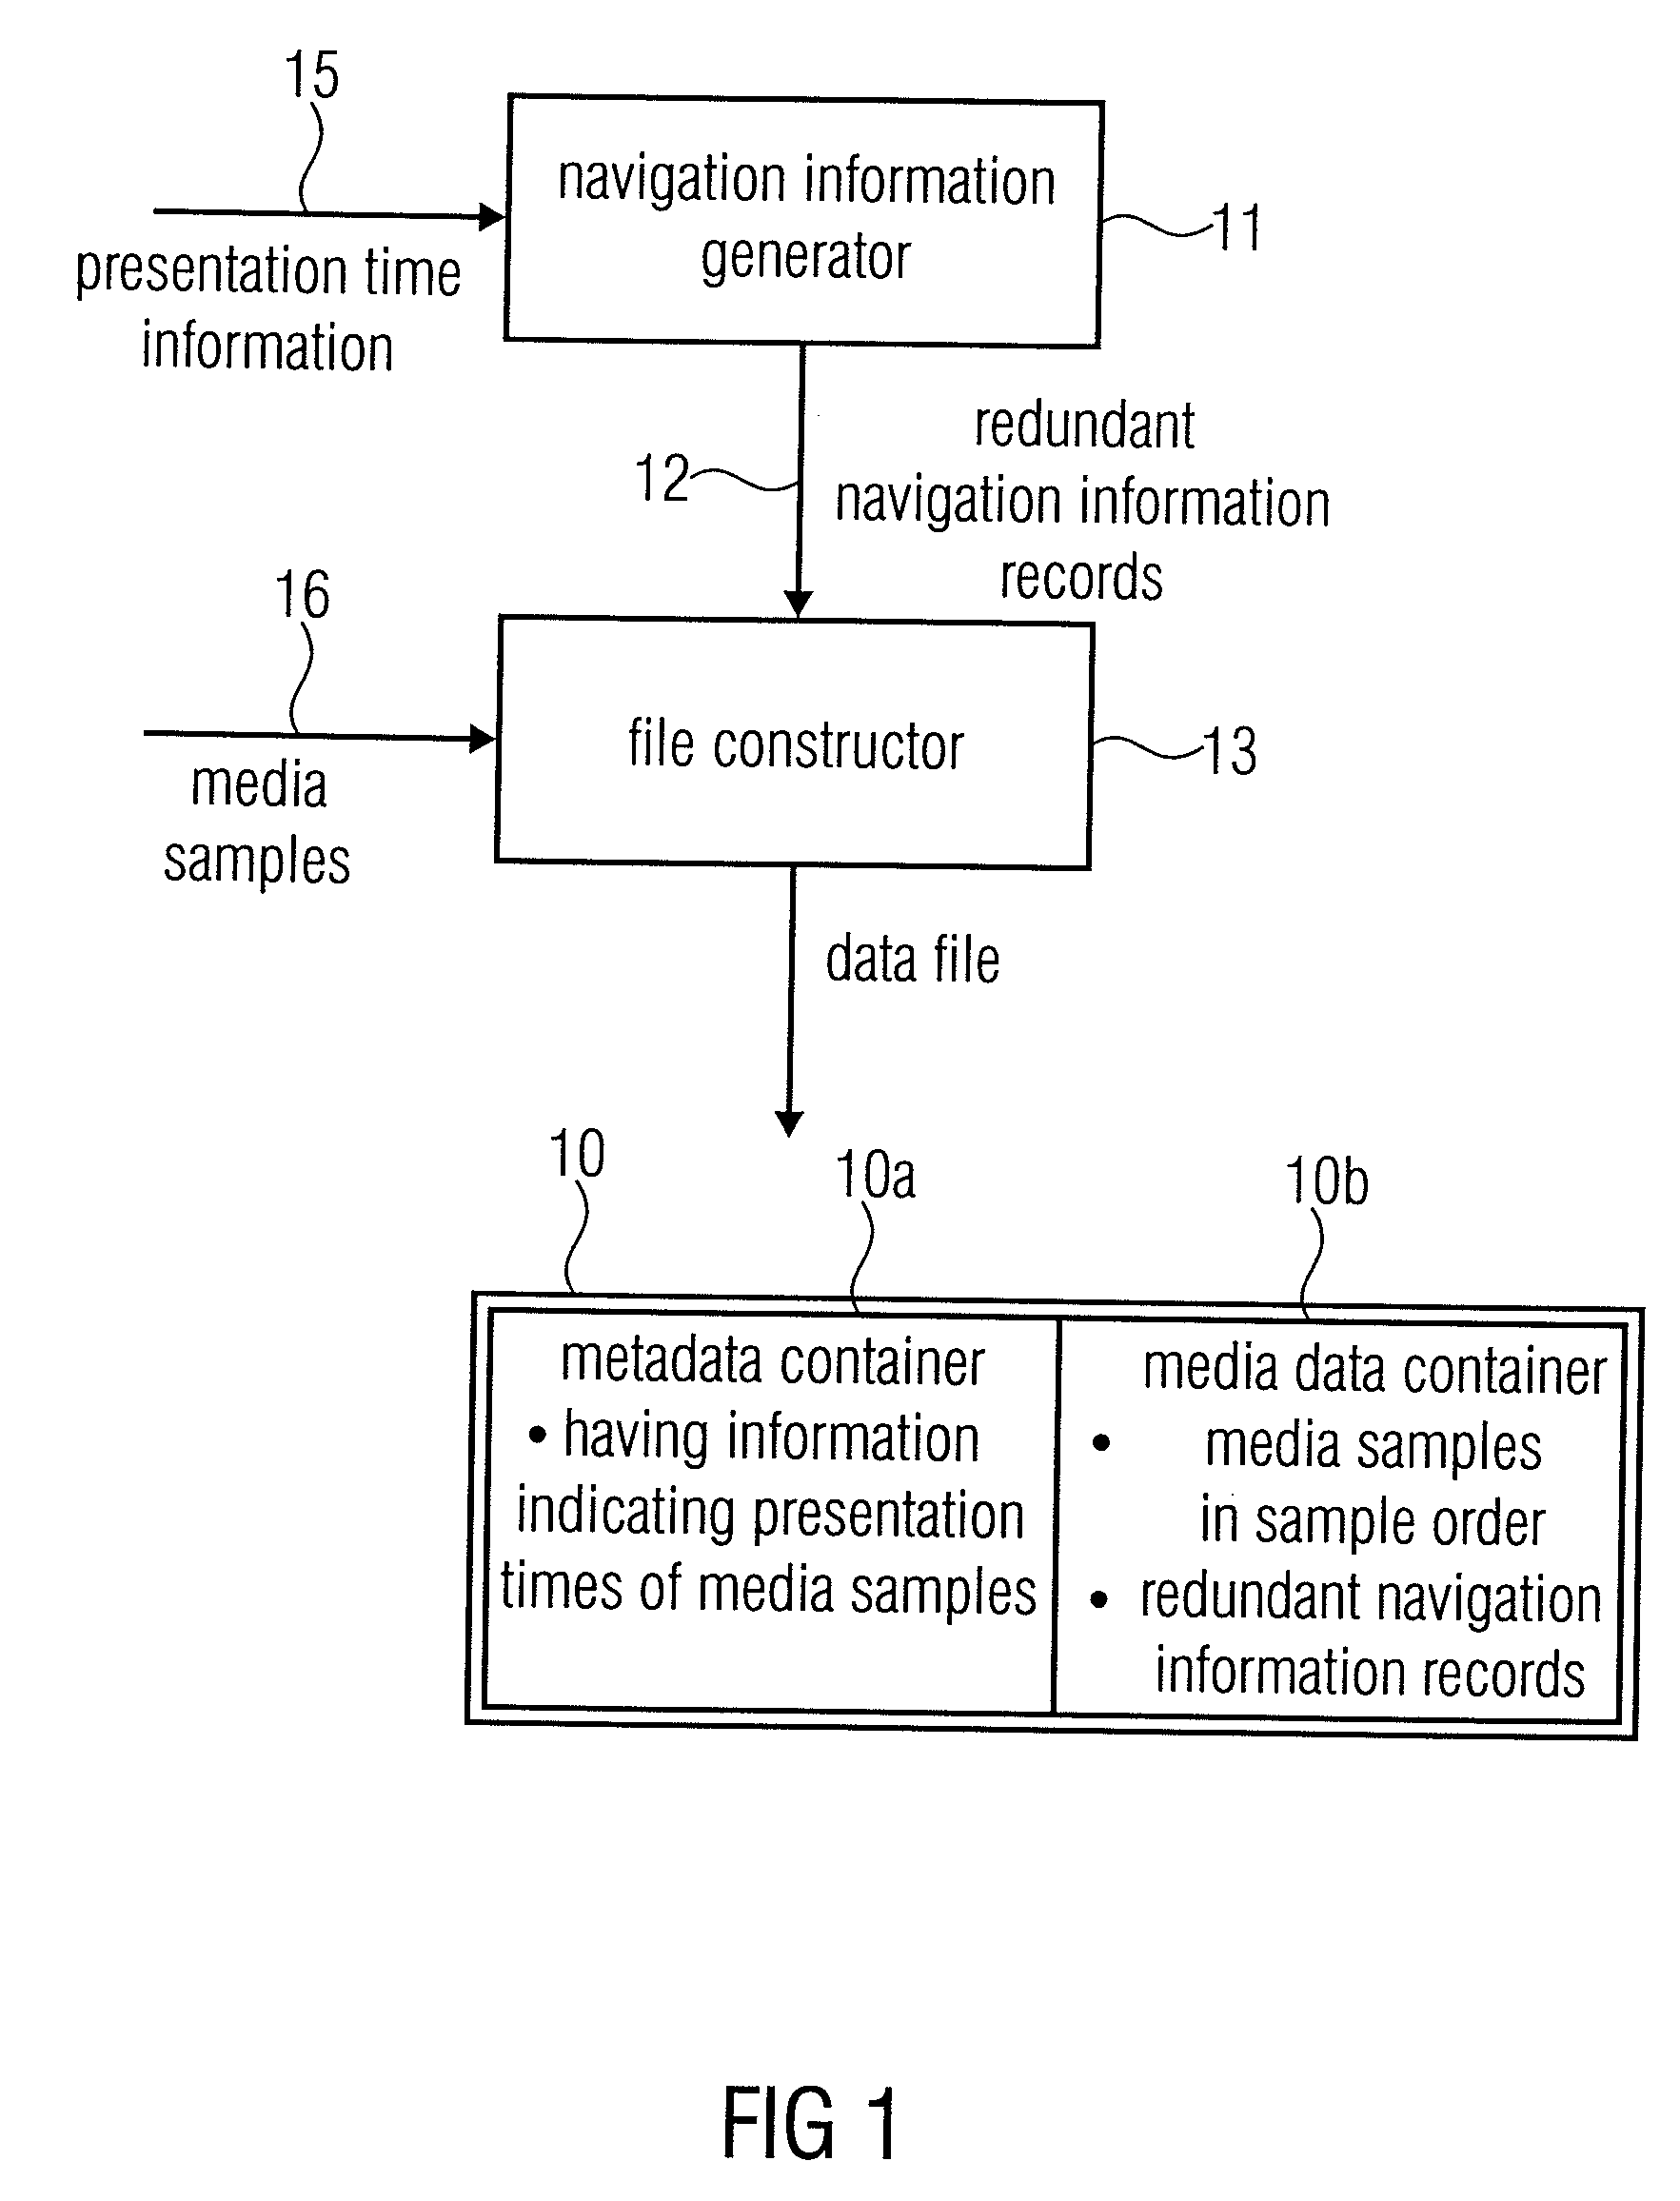 Apparatus and Method for Generating a Data File or for Reading a Data File